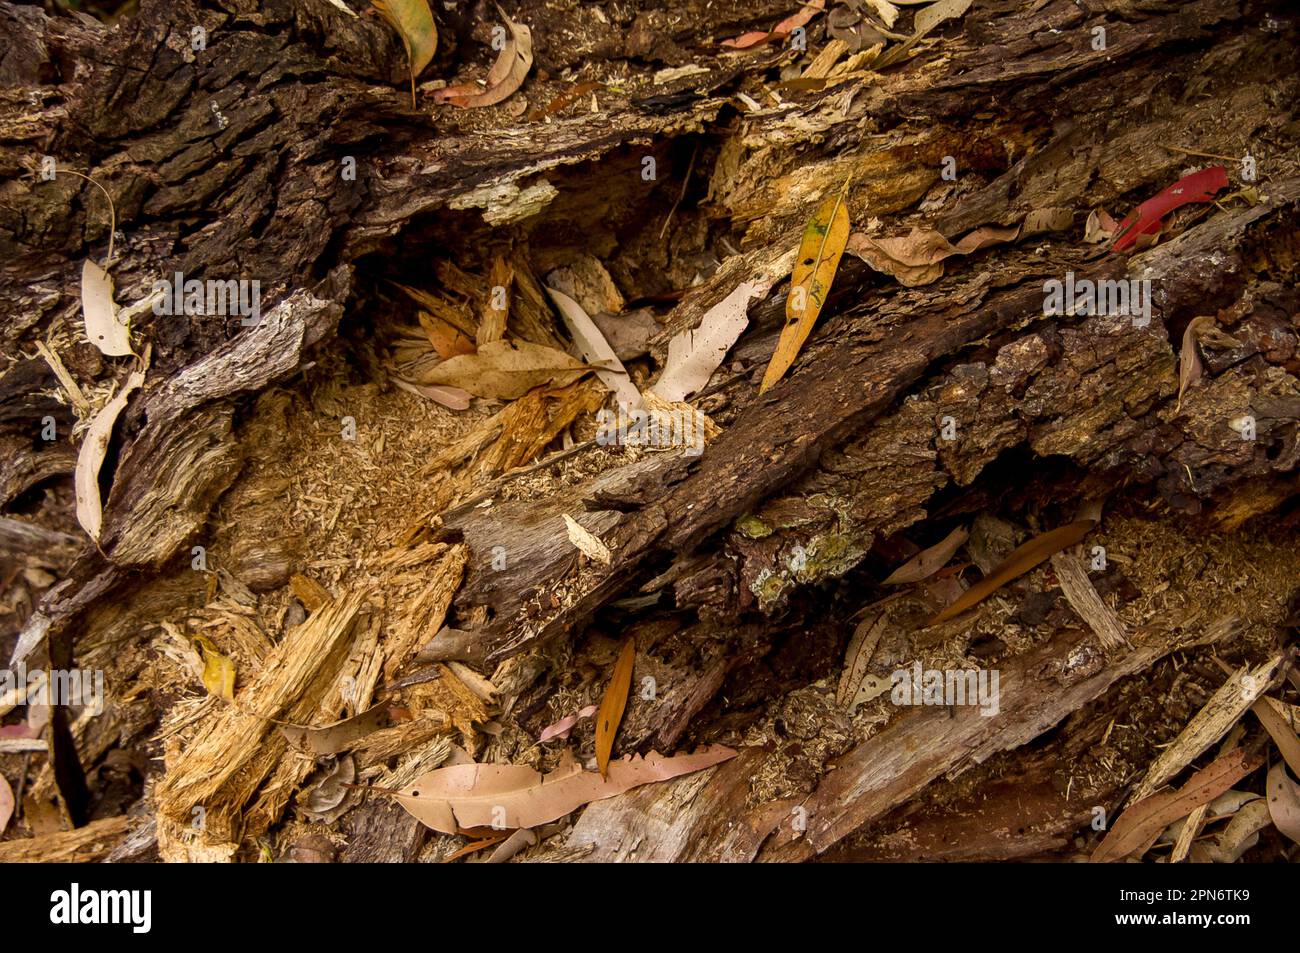 Organic debris on forest floor in Australian lowland subtropical rainforest in Queensland. Bark, leaves, rotting wood, form thick ground covering. Stock Photo